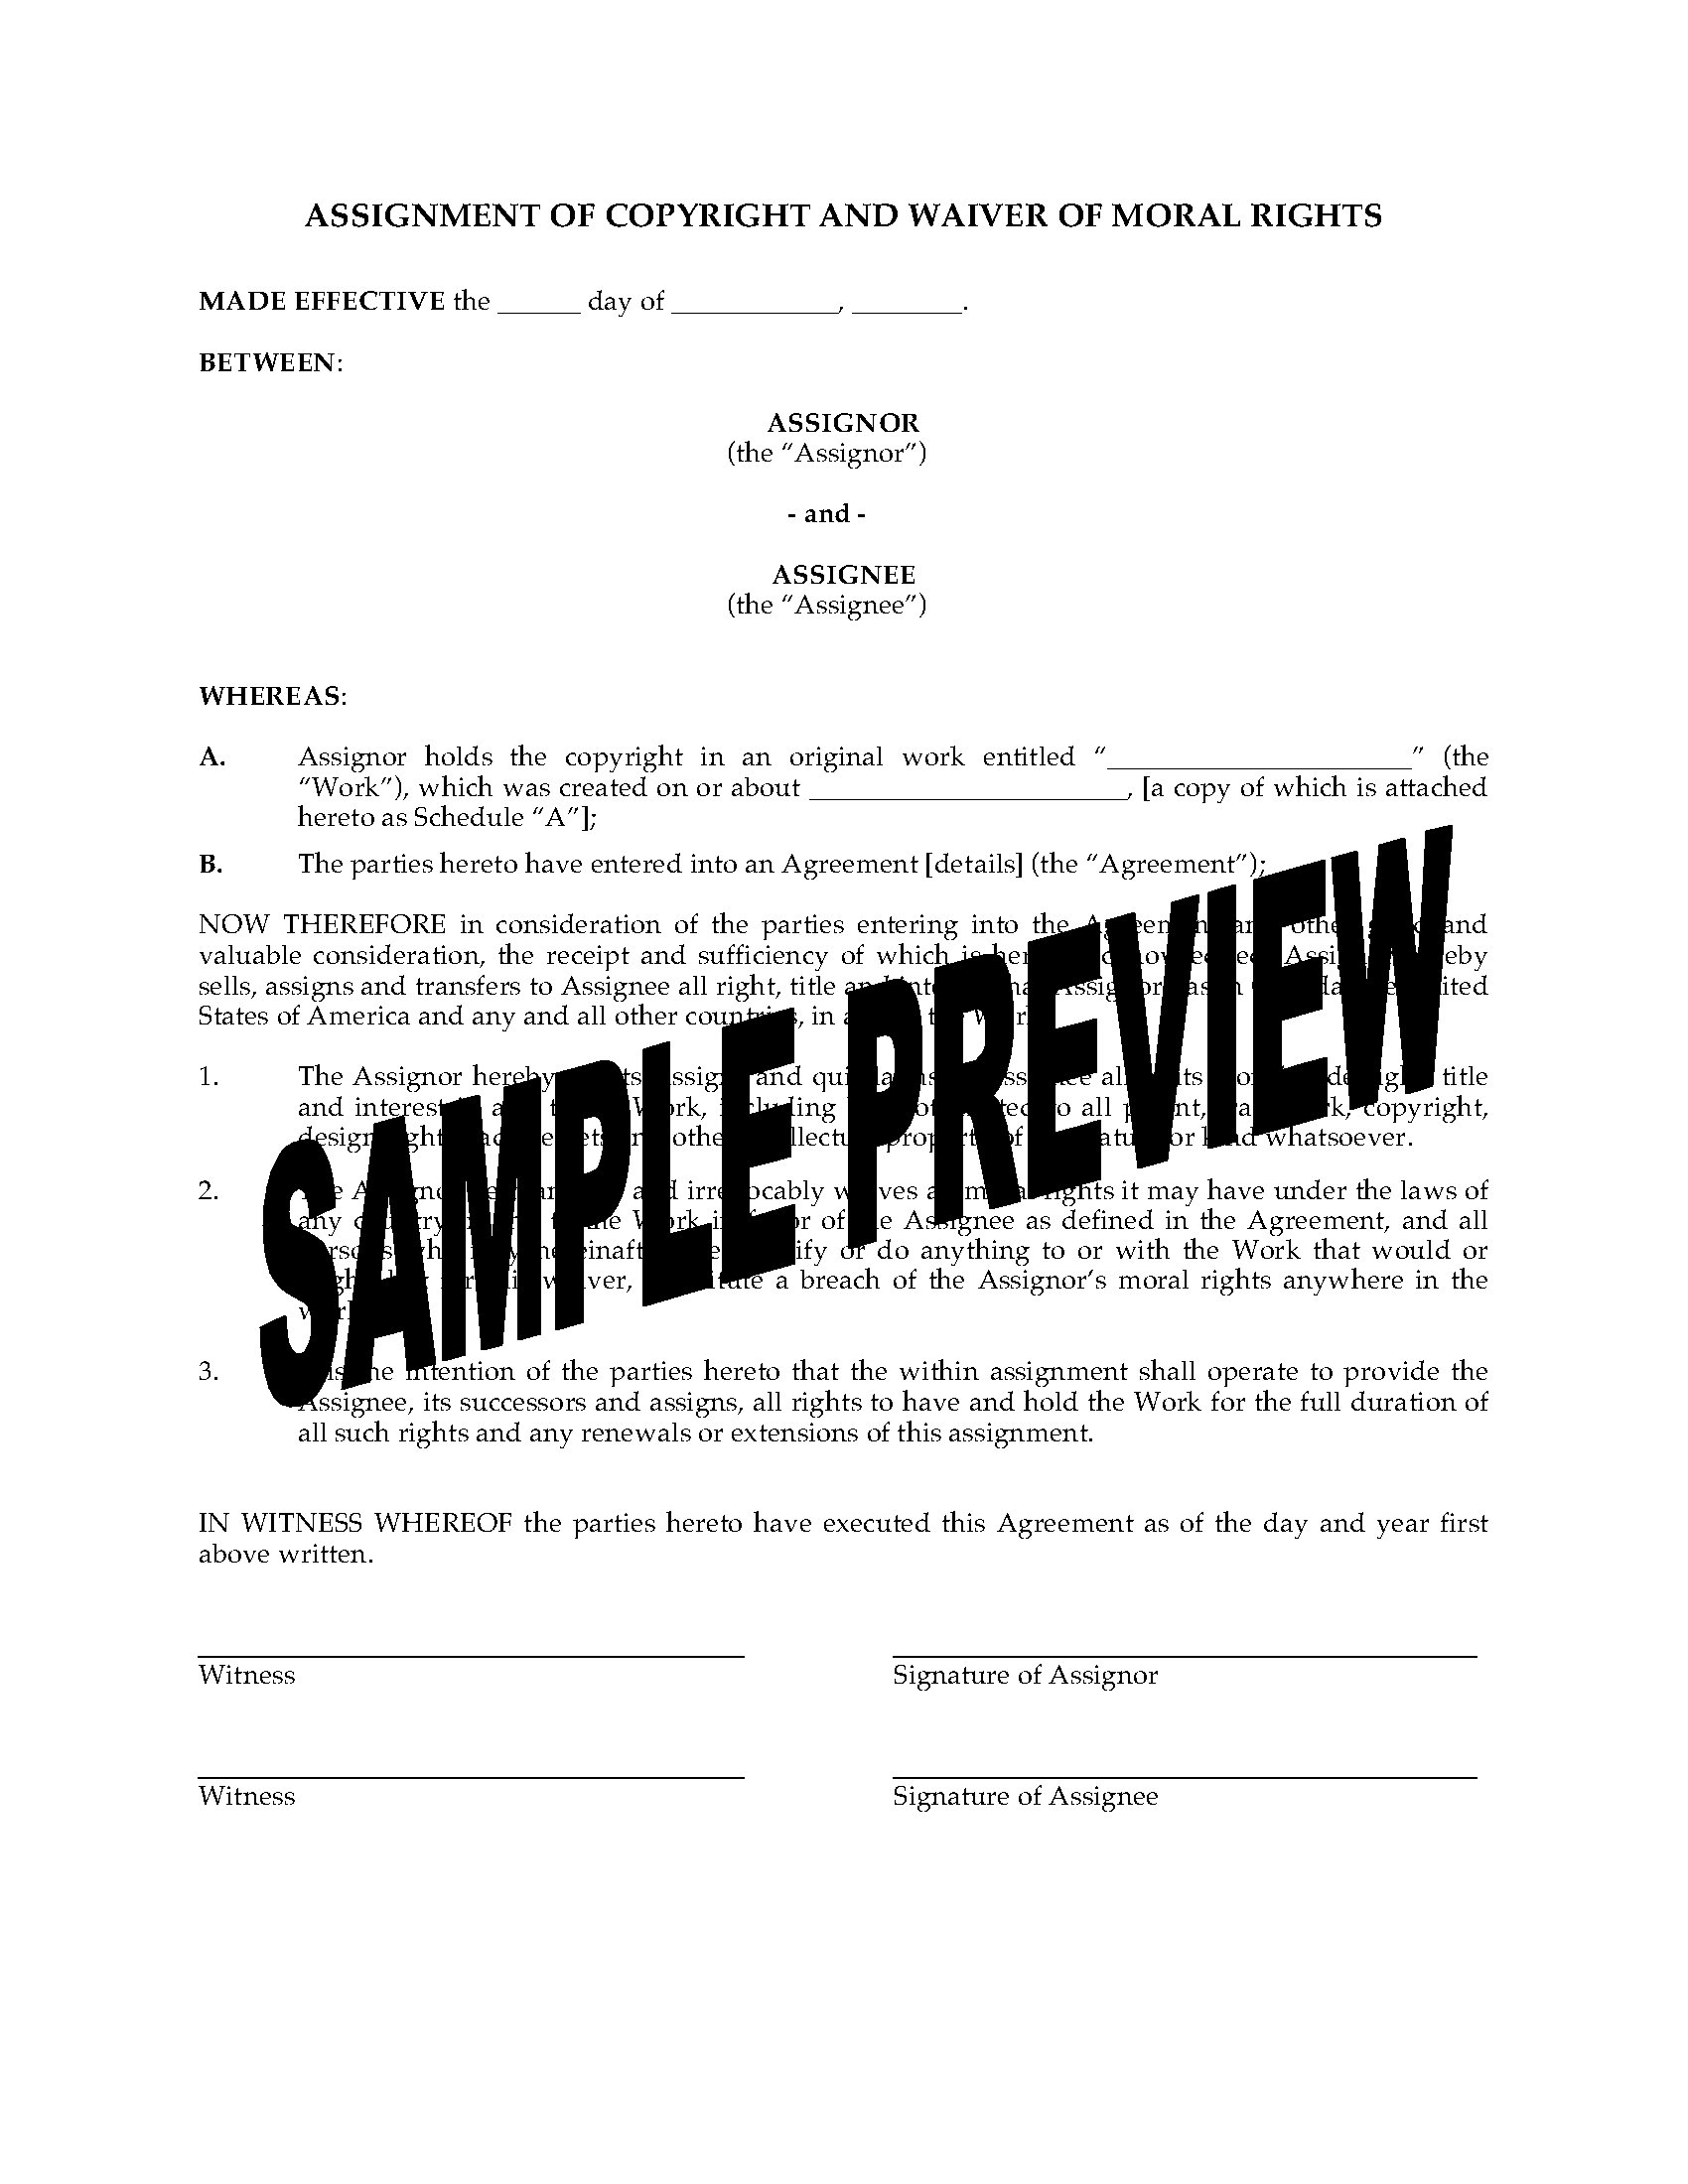 Copyright Assignment Agreement Template from www.megadox.com